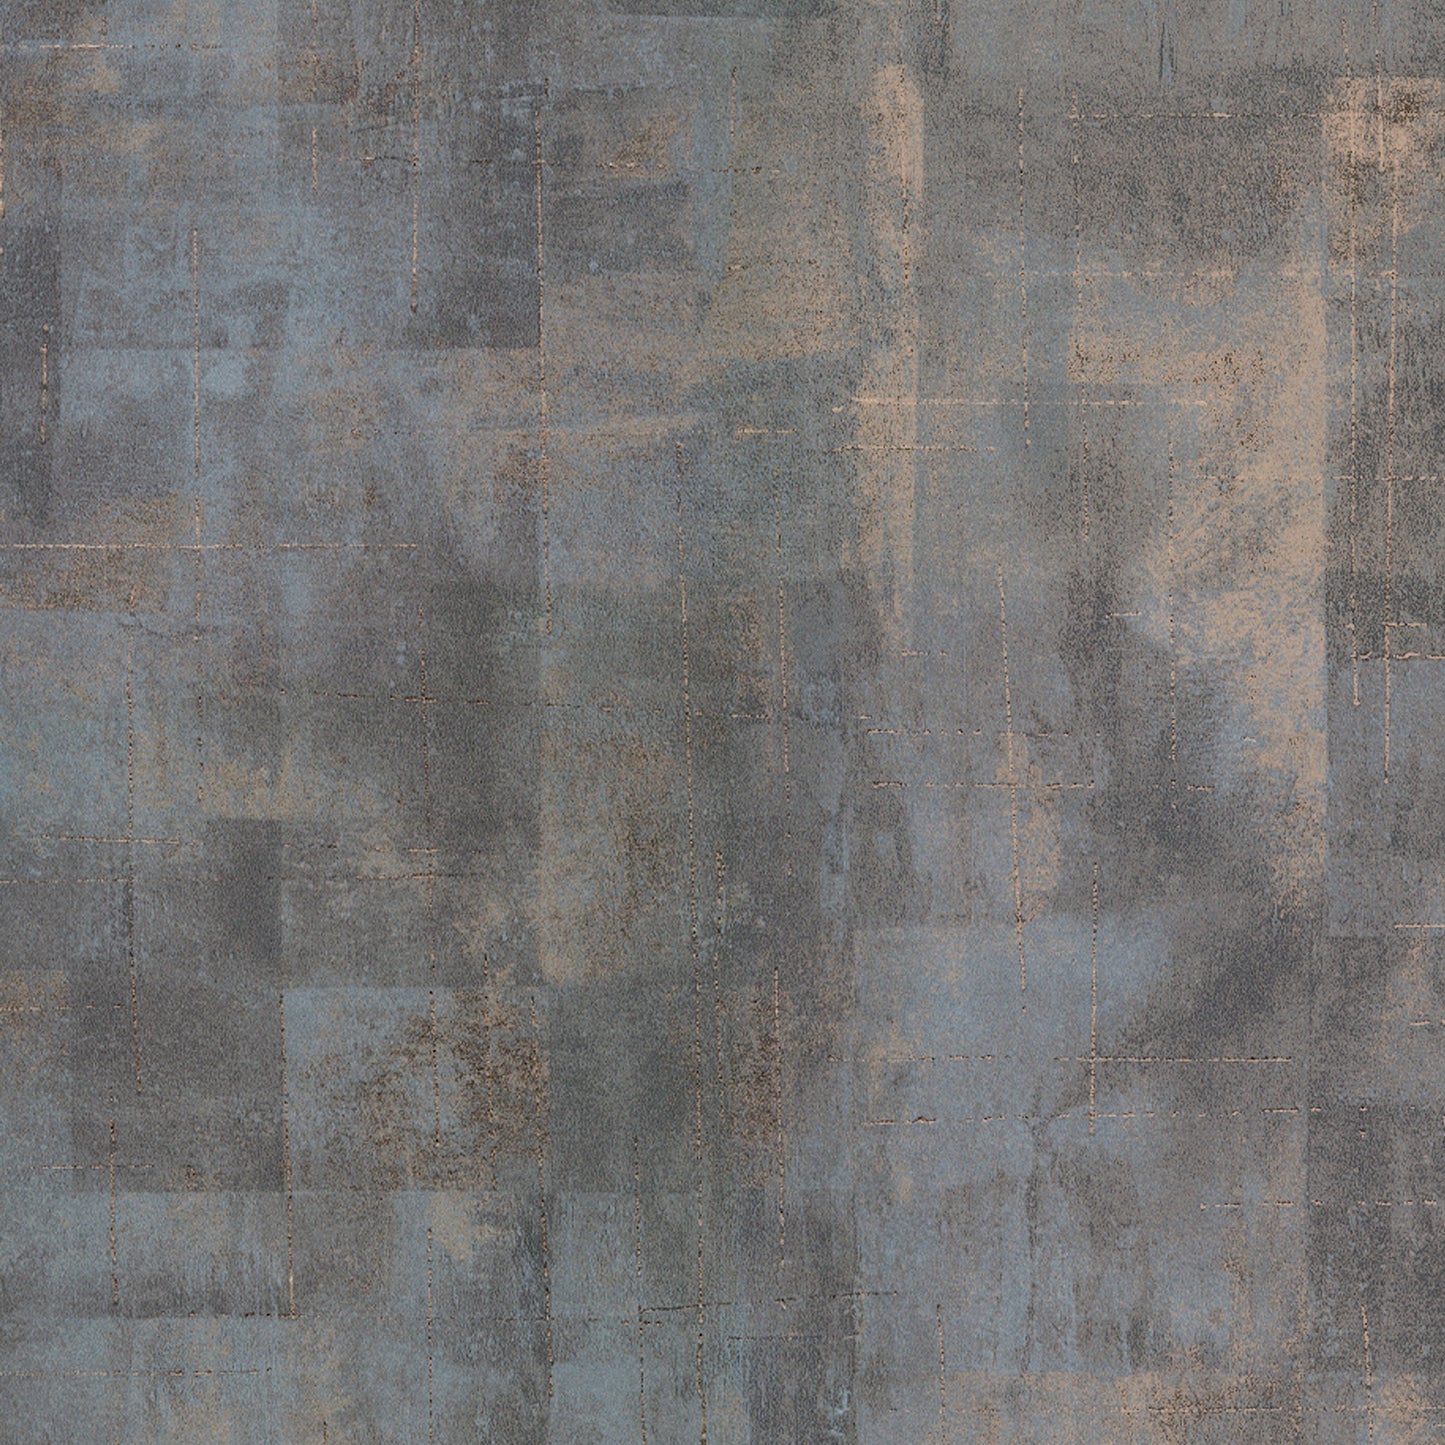 Shop 2927-20408 Polished Ozone Teal Texture Teal Brewster Wallpaper